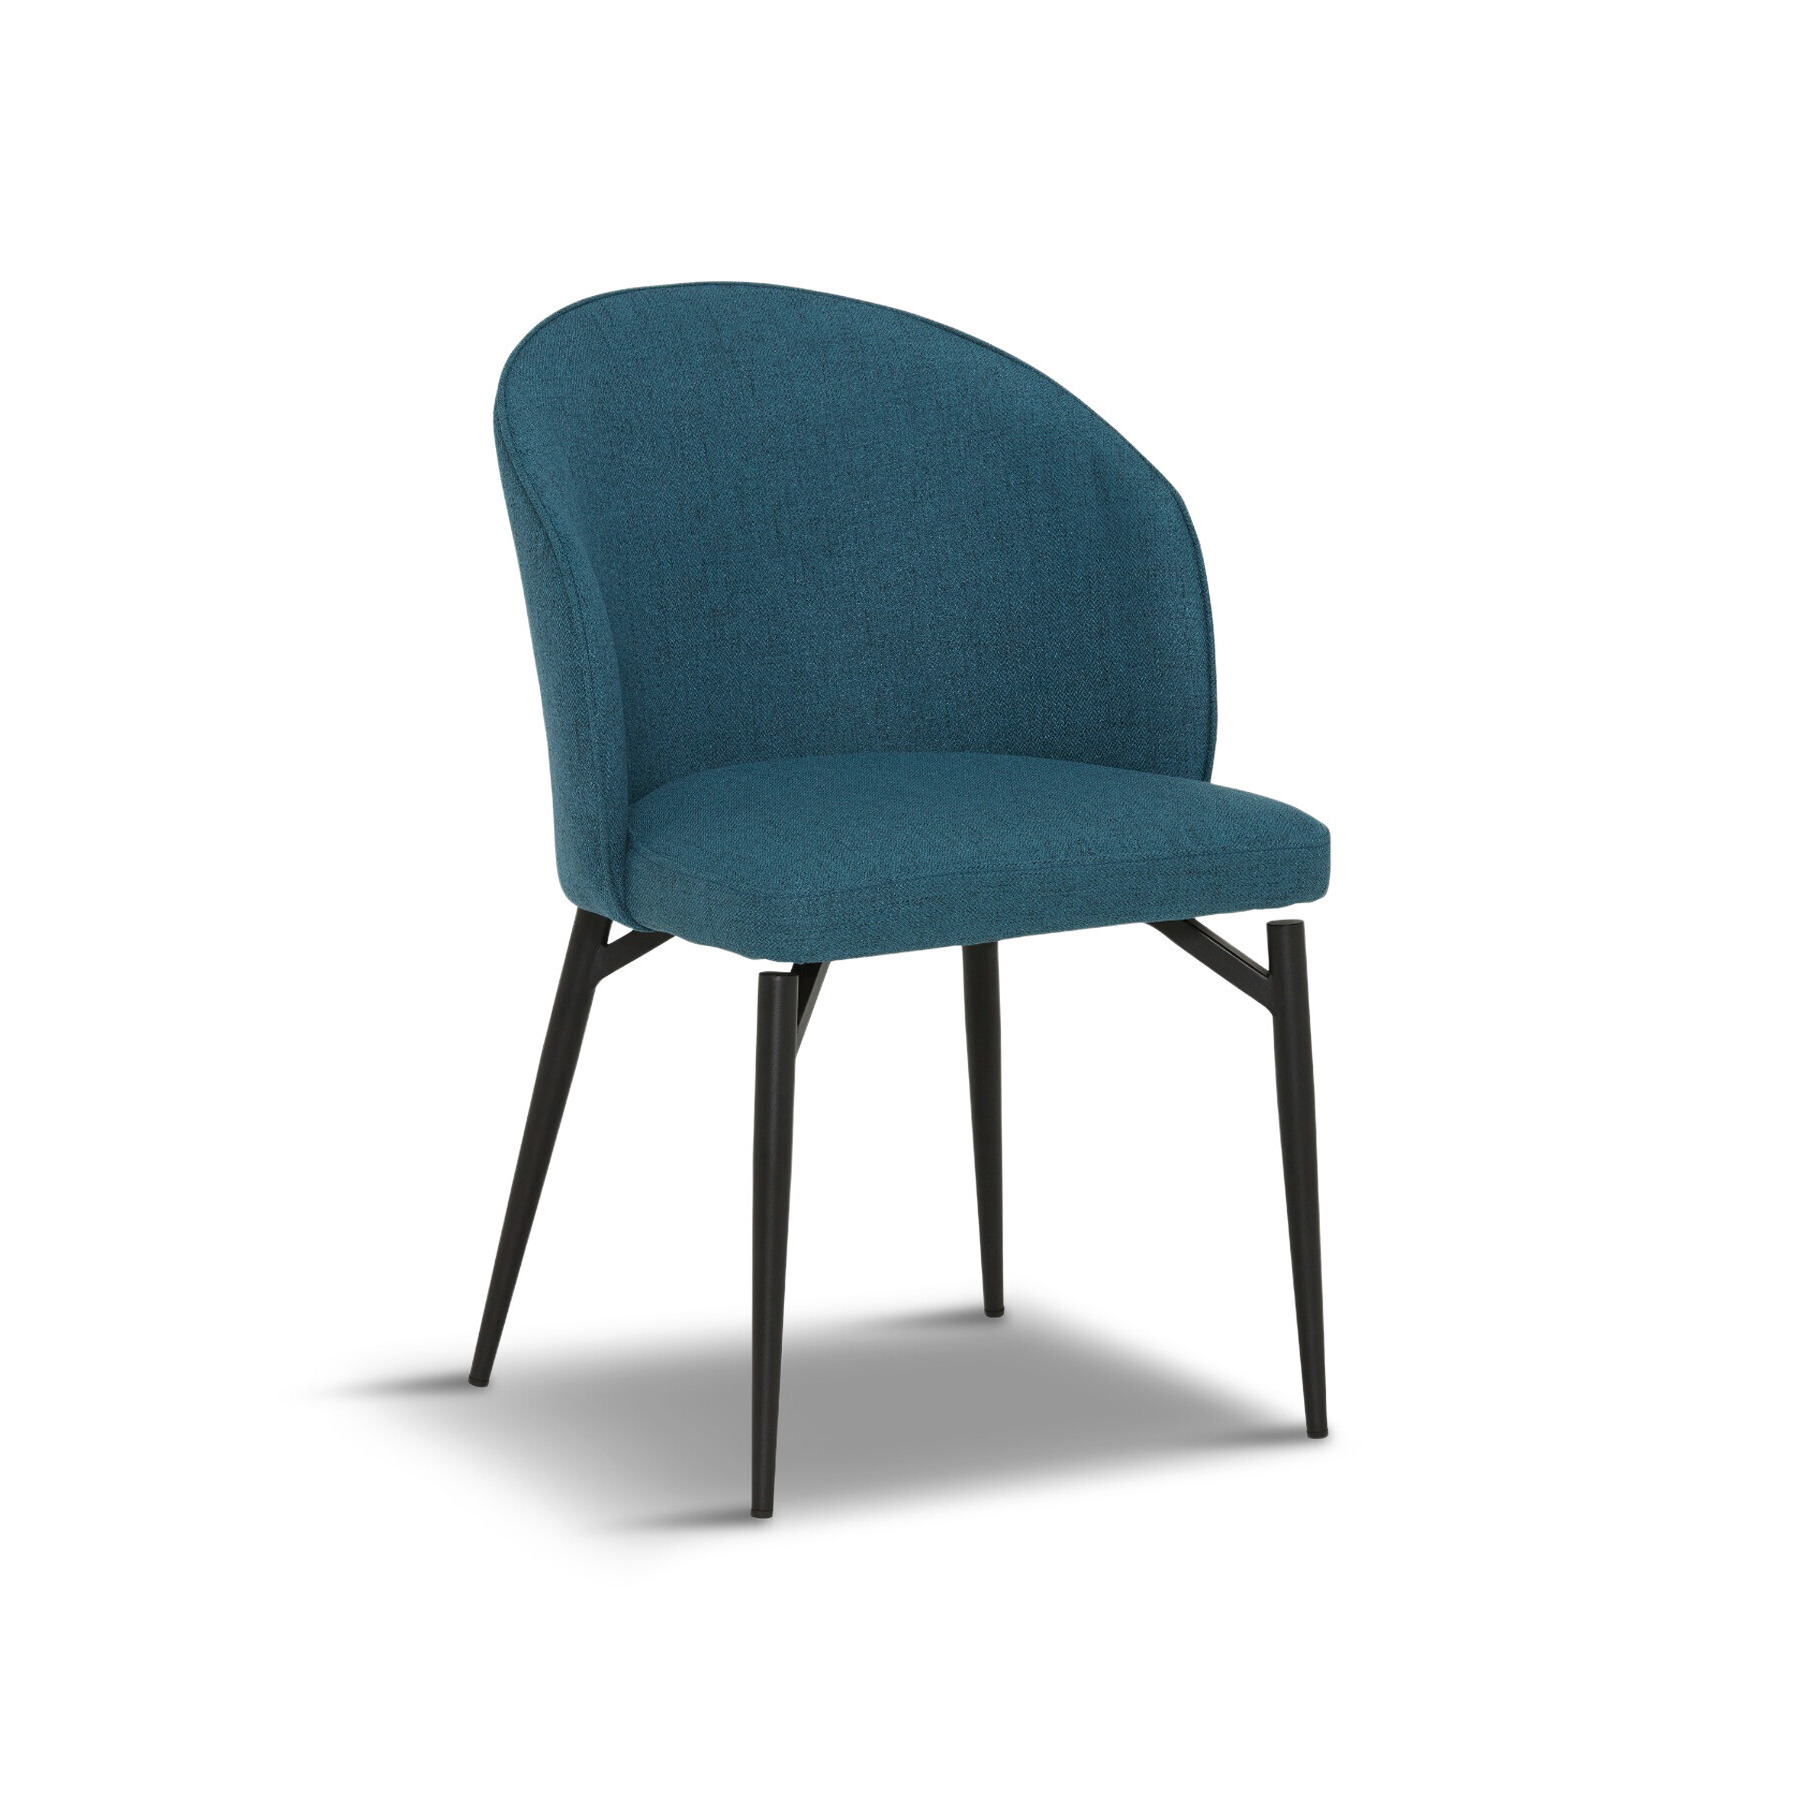 Barker and Stonehouse Lauri Blue Dining Chair - image 1